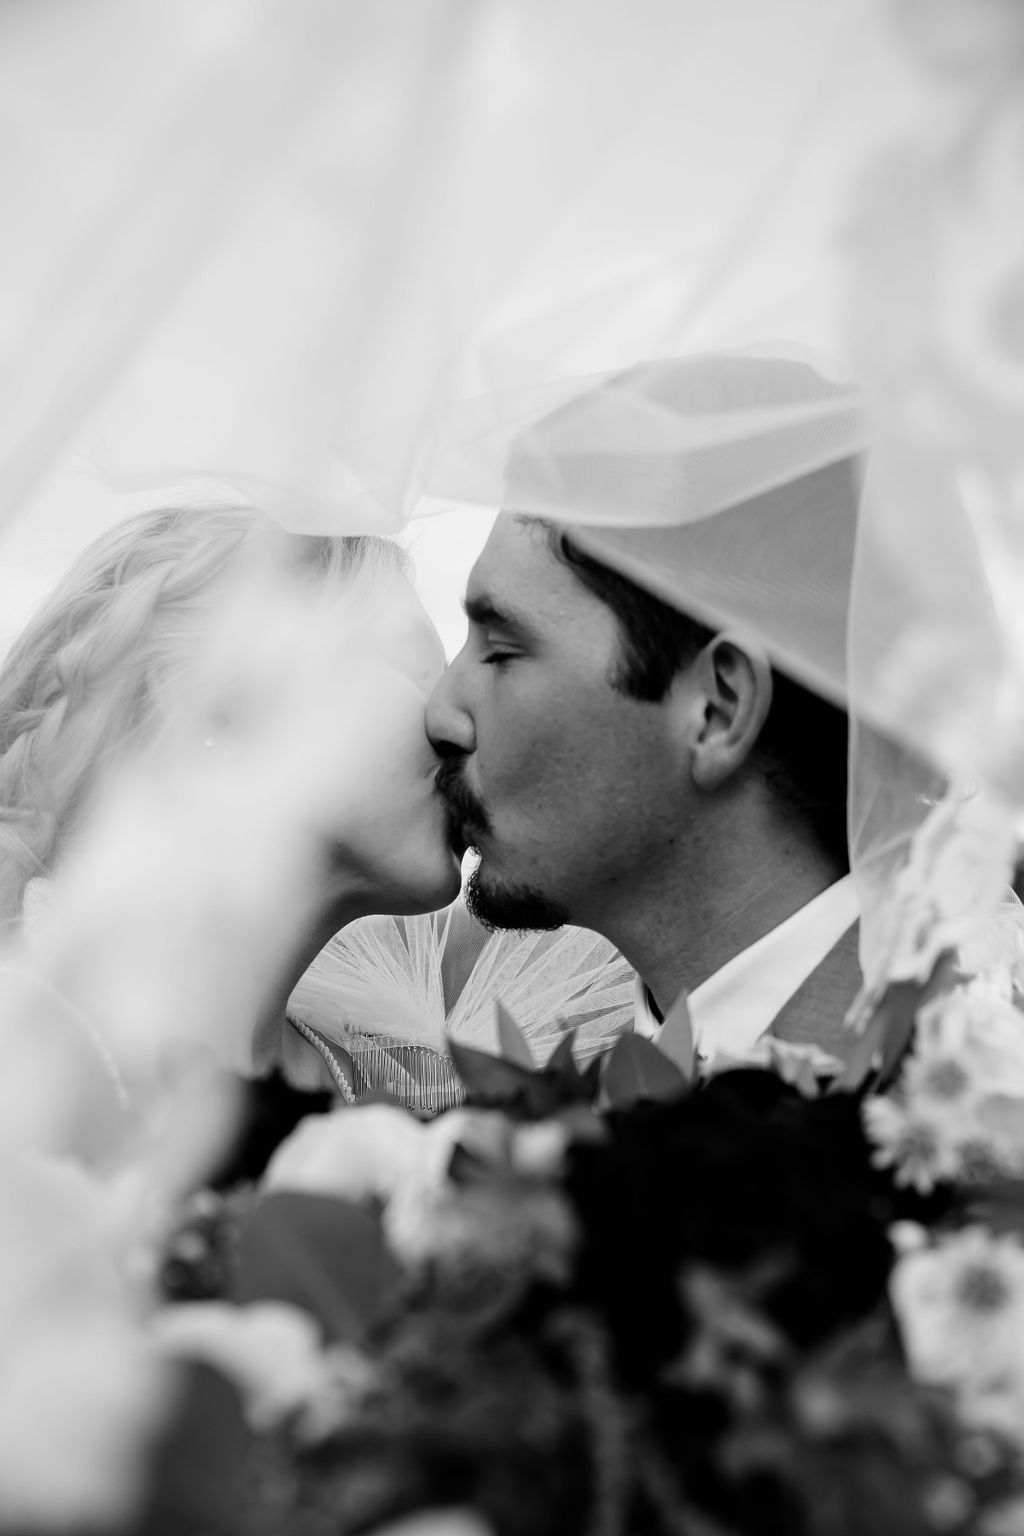 A man and woman kissing under the veil.